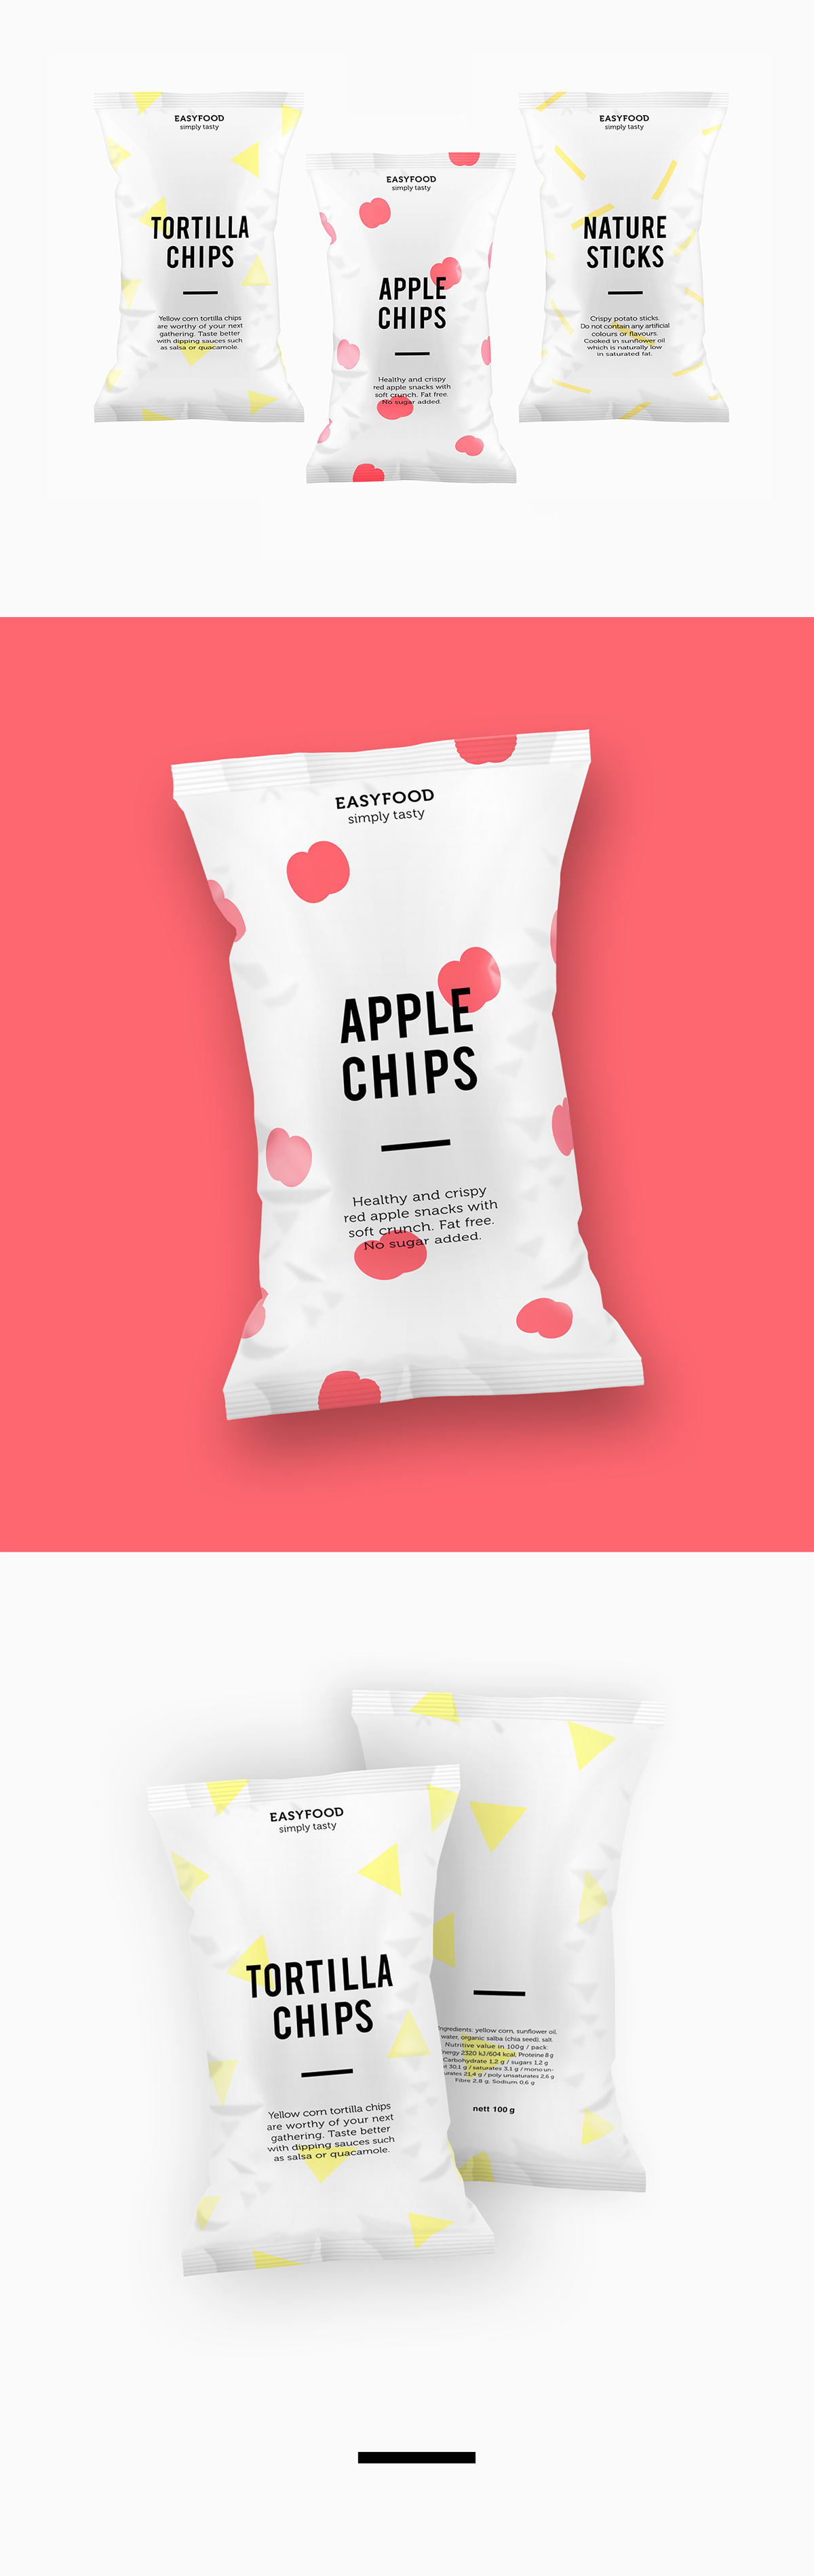 can carton milk vegetable bag chips Cheap low price easy Food  concept identity funny minimal market